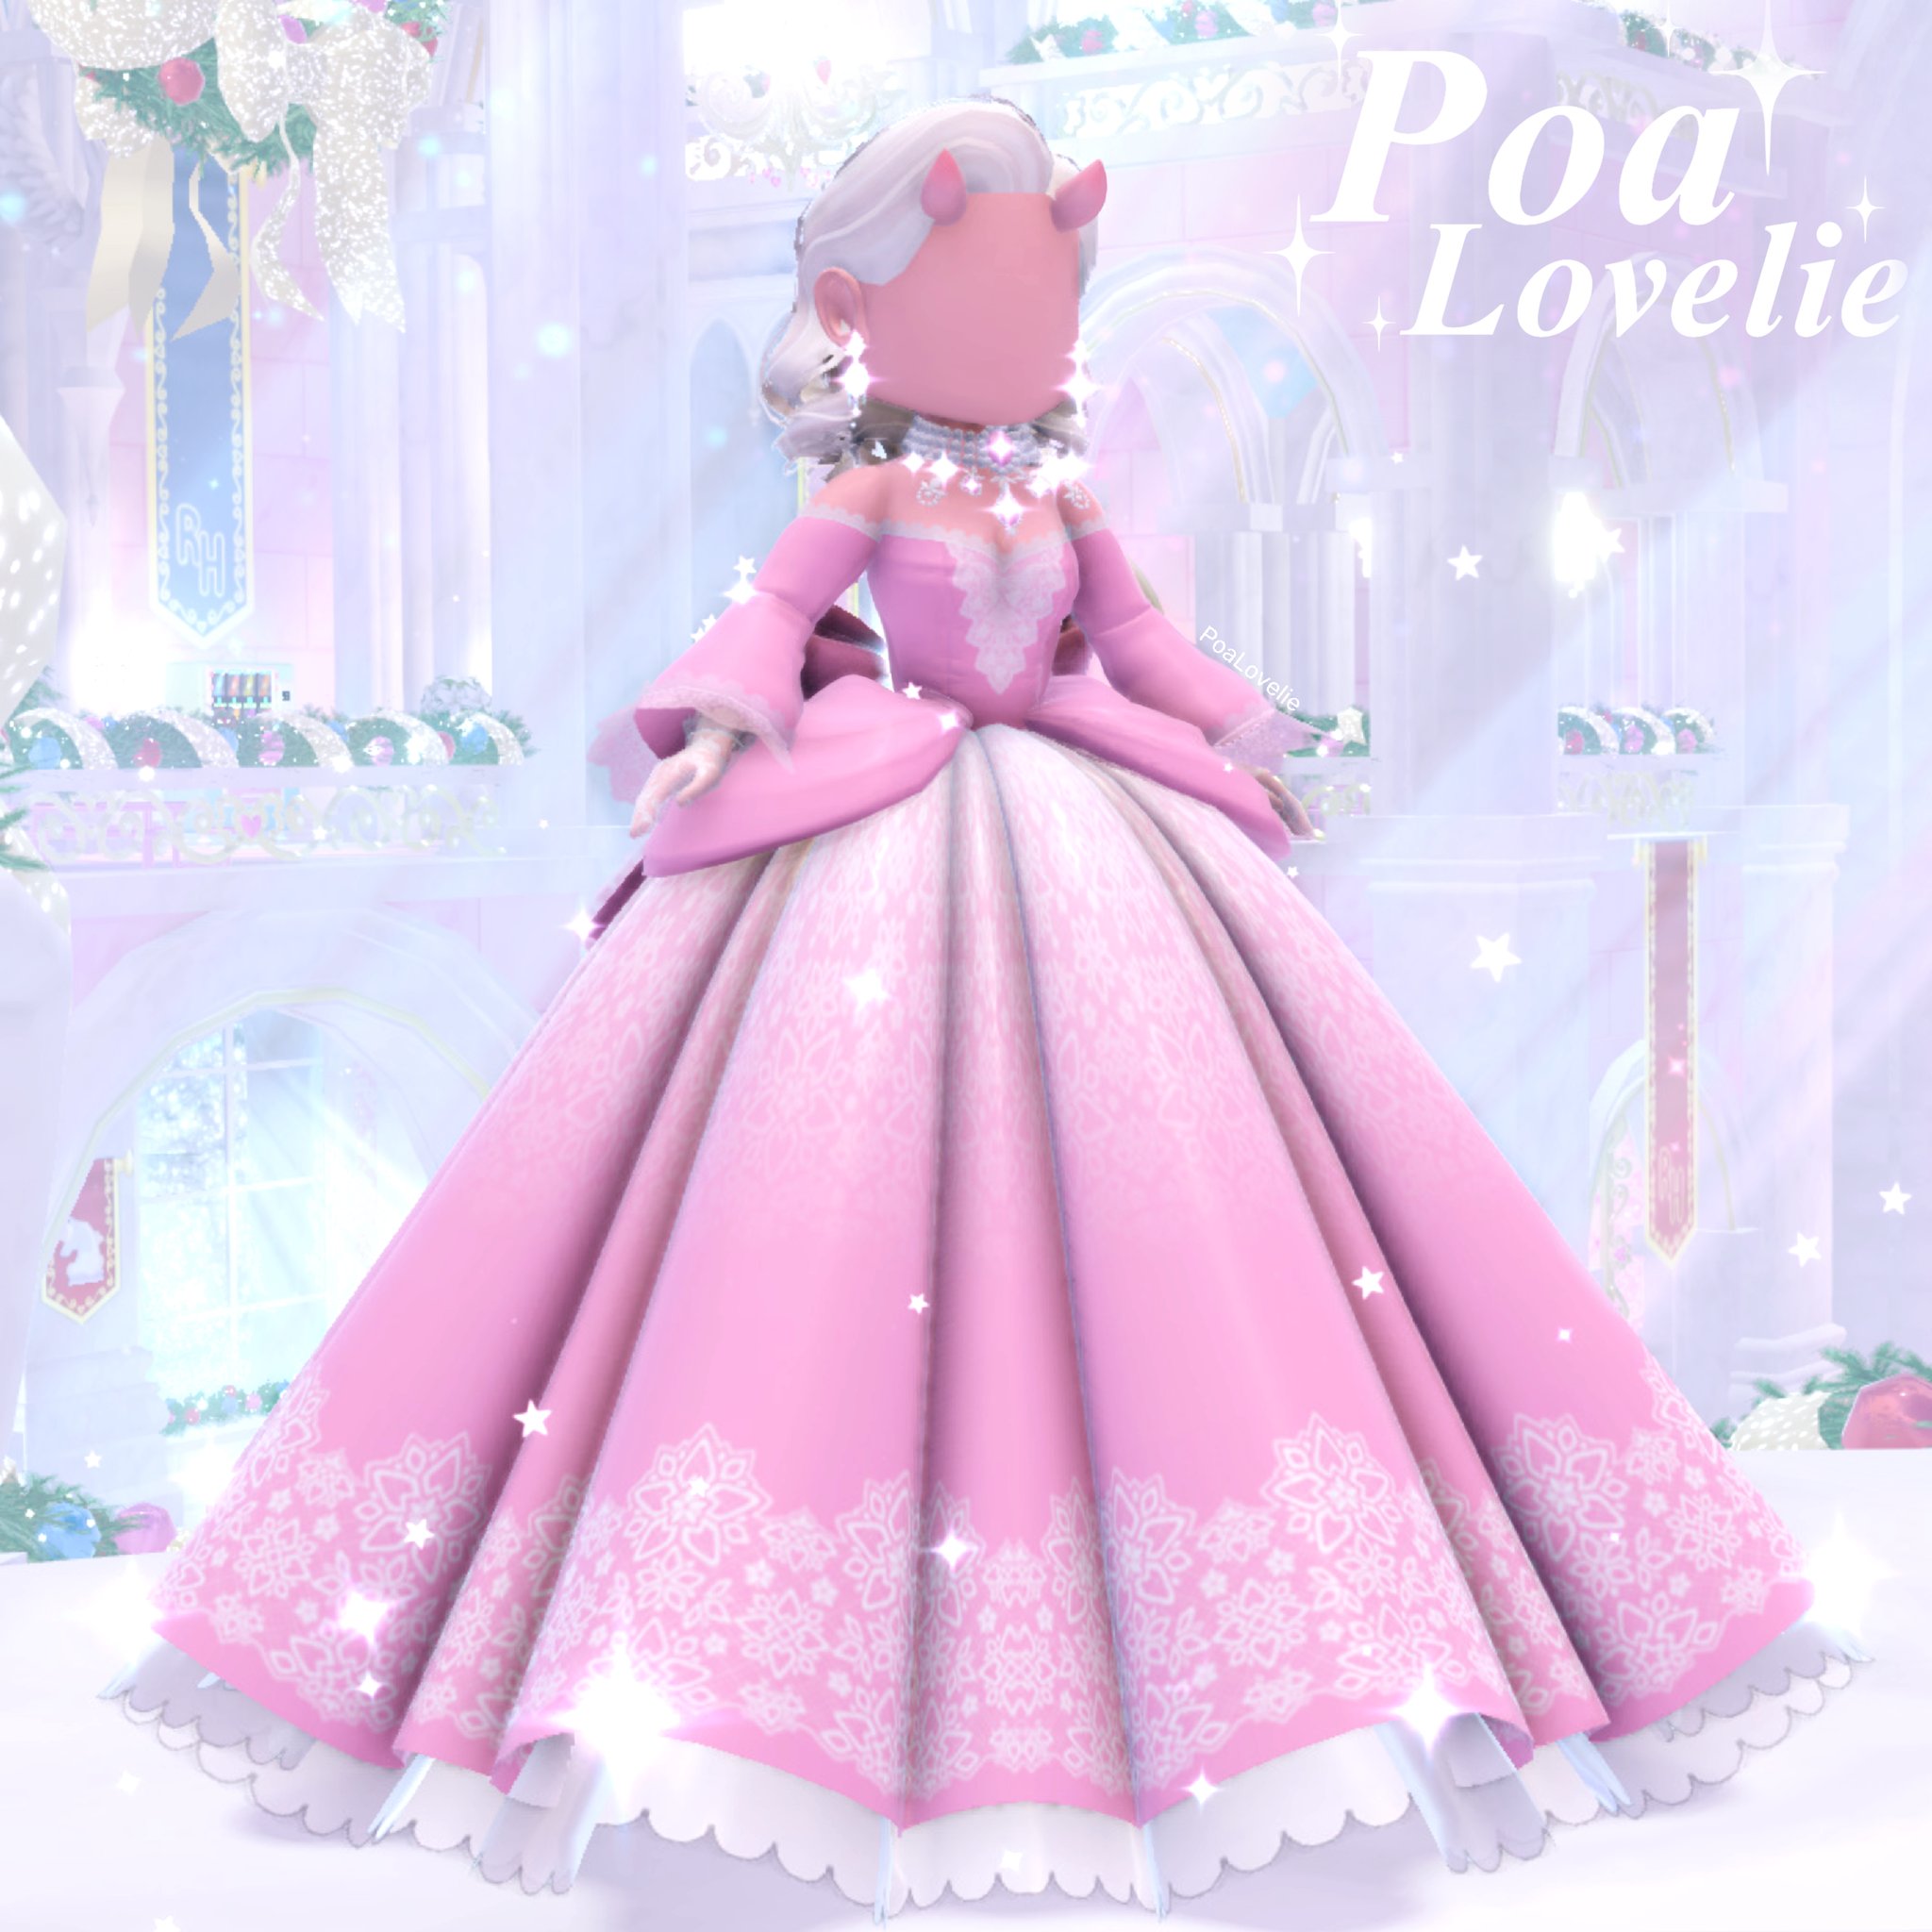 Royale High Outfits on X: A little late but thank you so much for